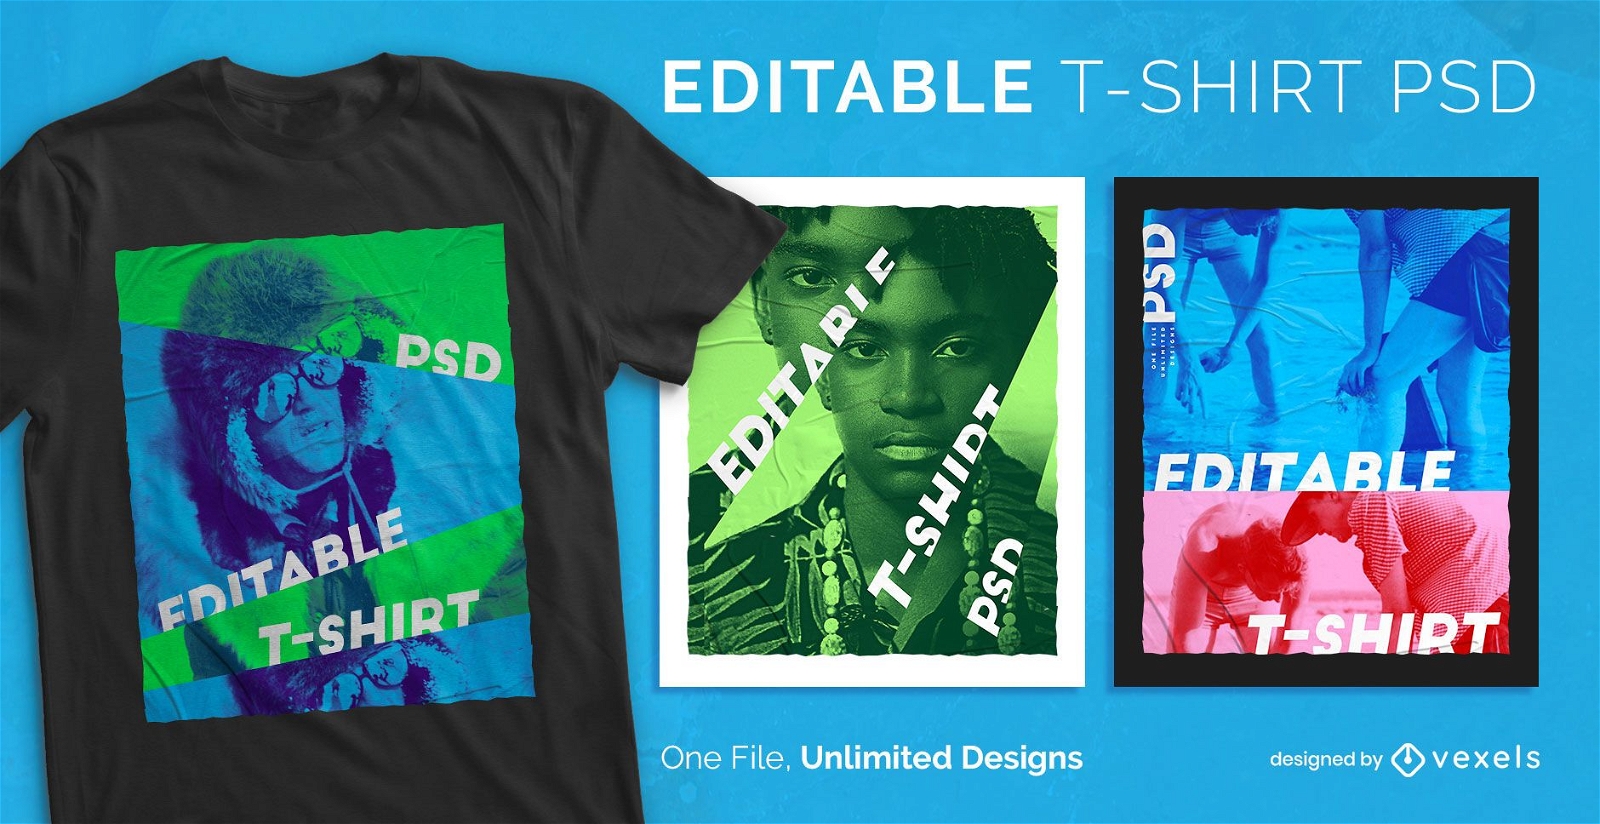 Color filter effect scalable t-shirt psd